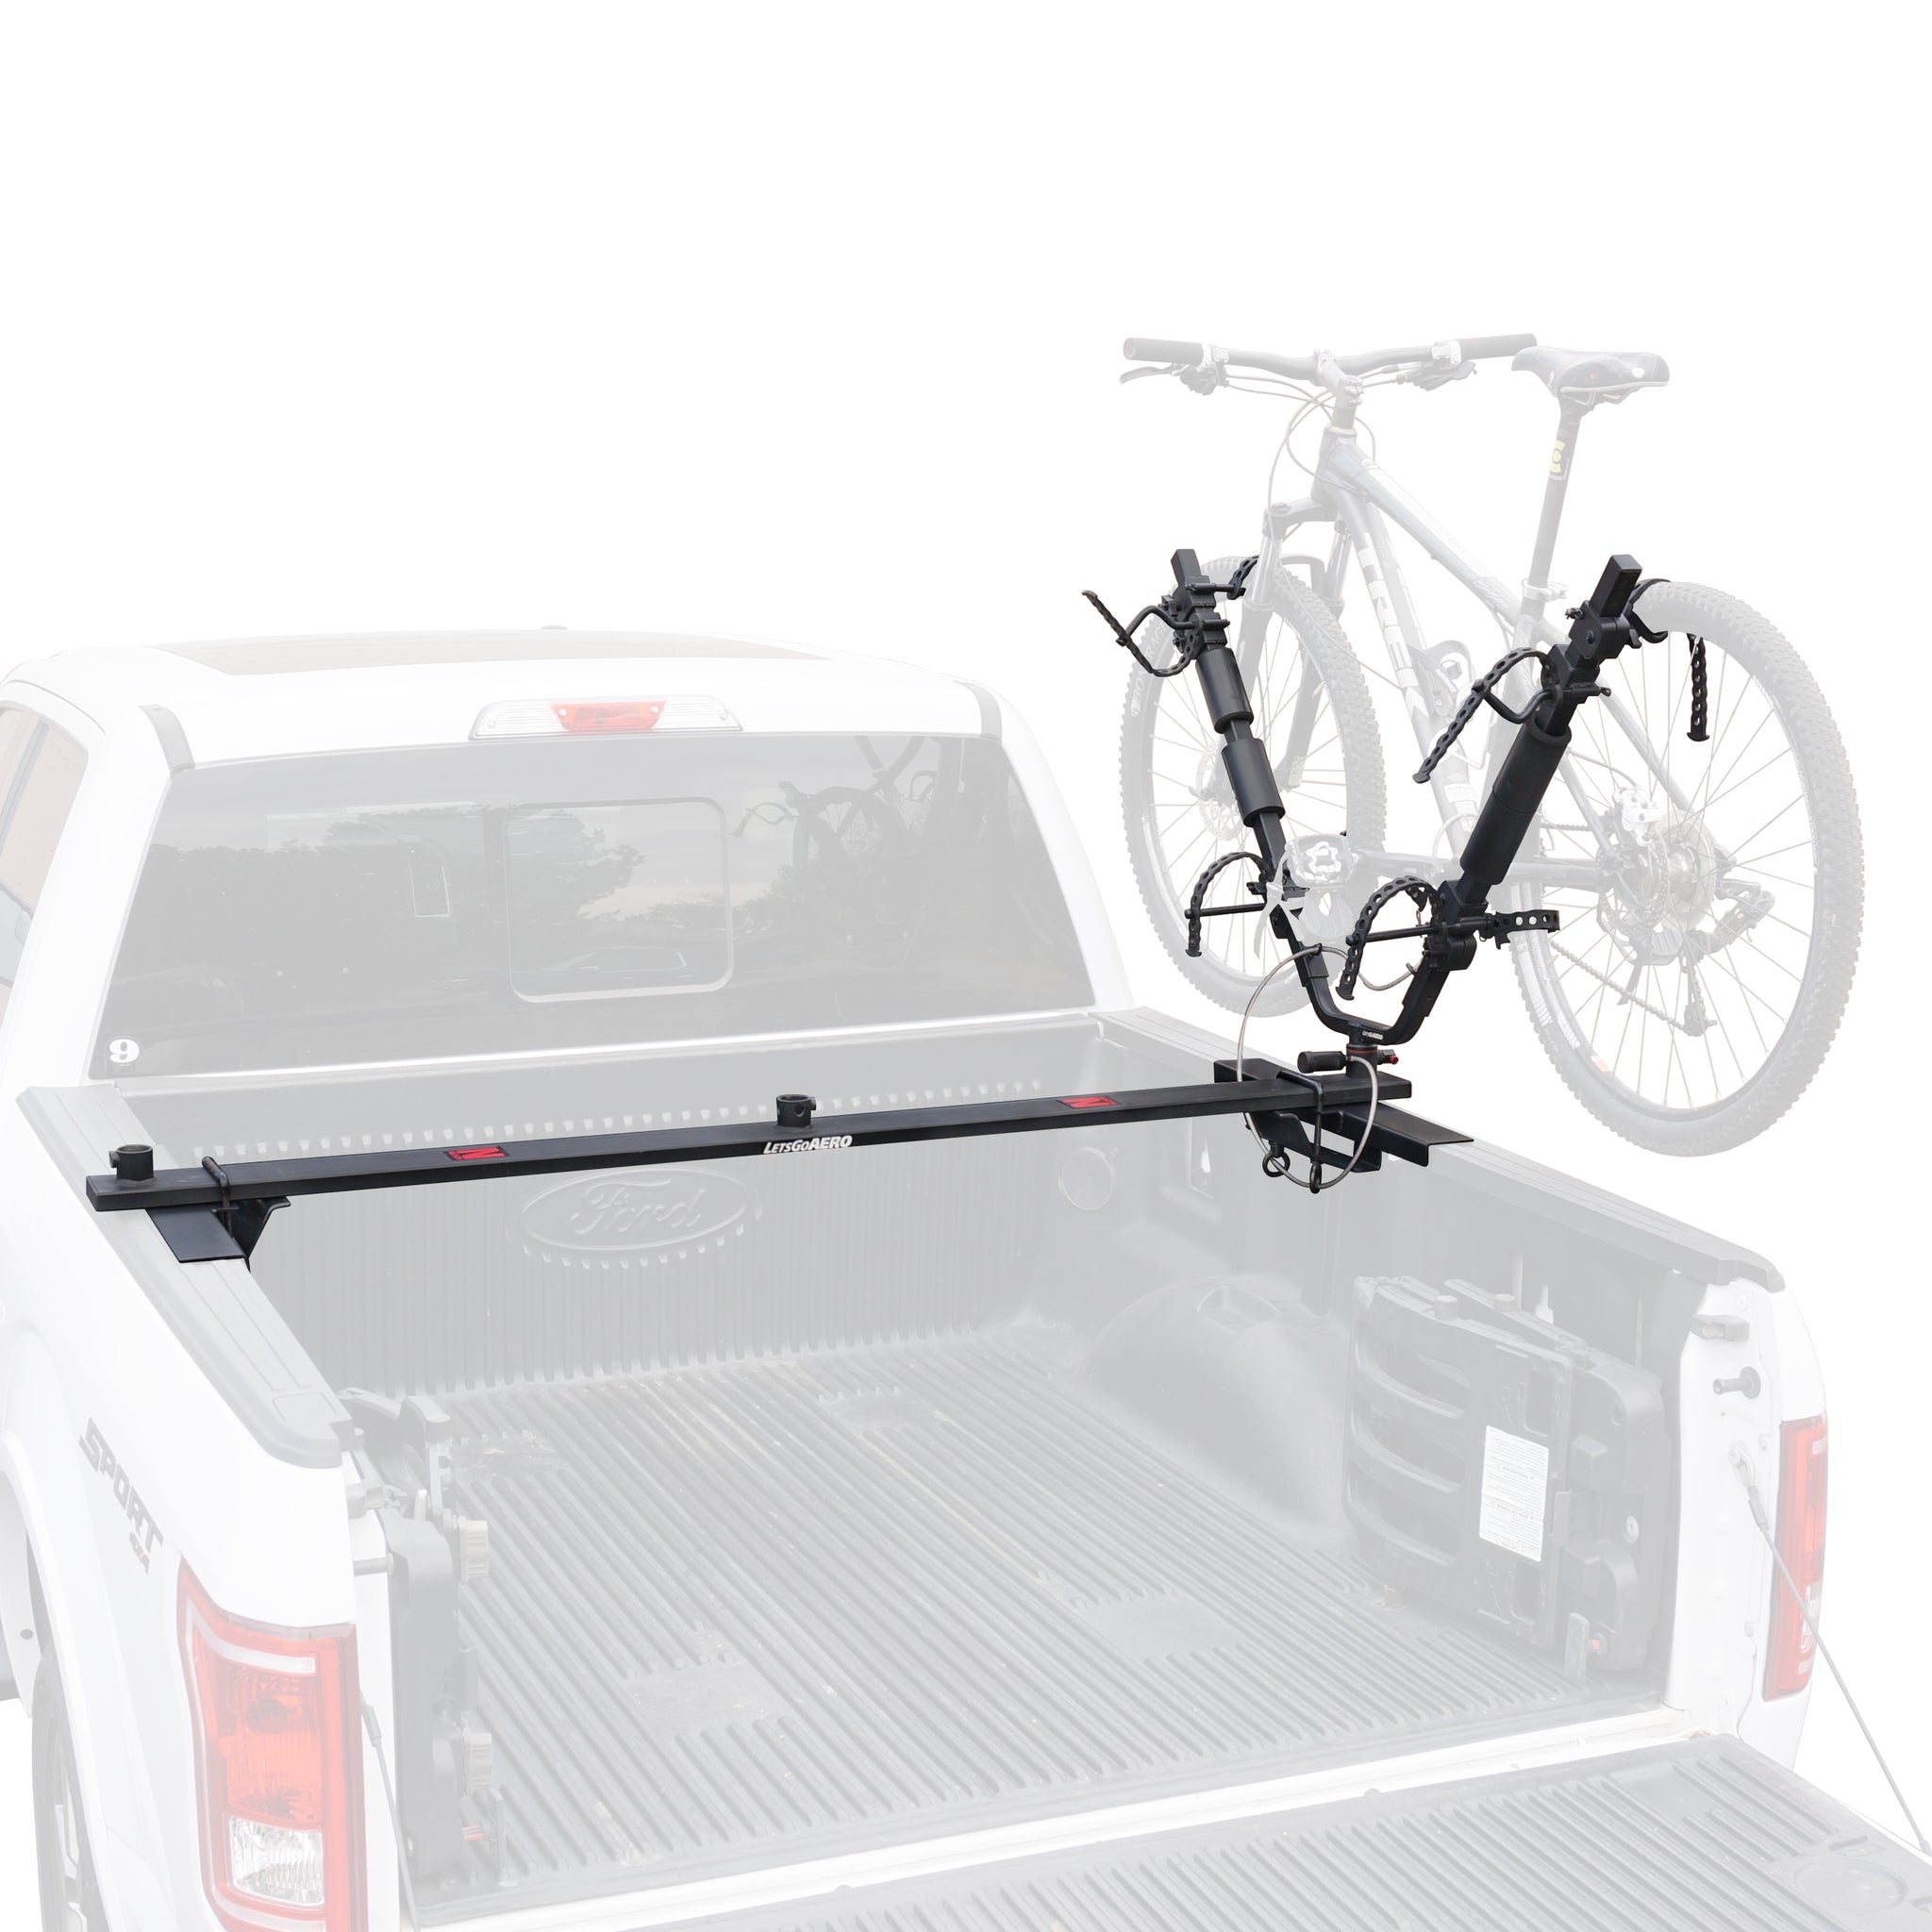 Full Nelson on Truck Bed with One Bike